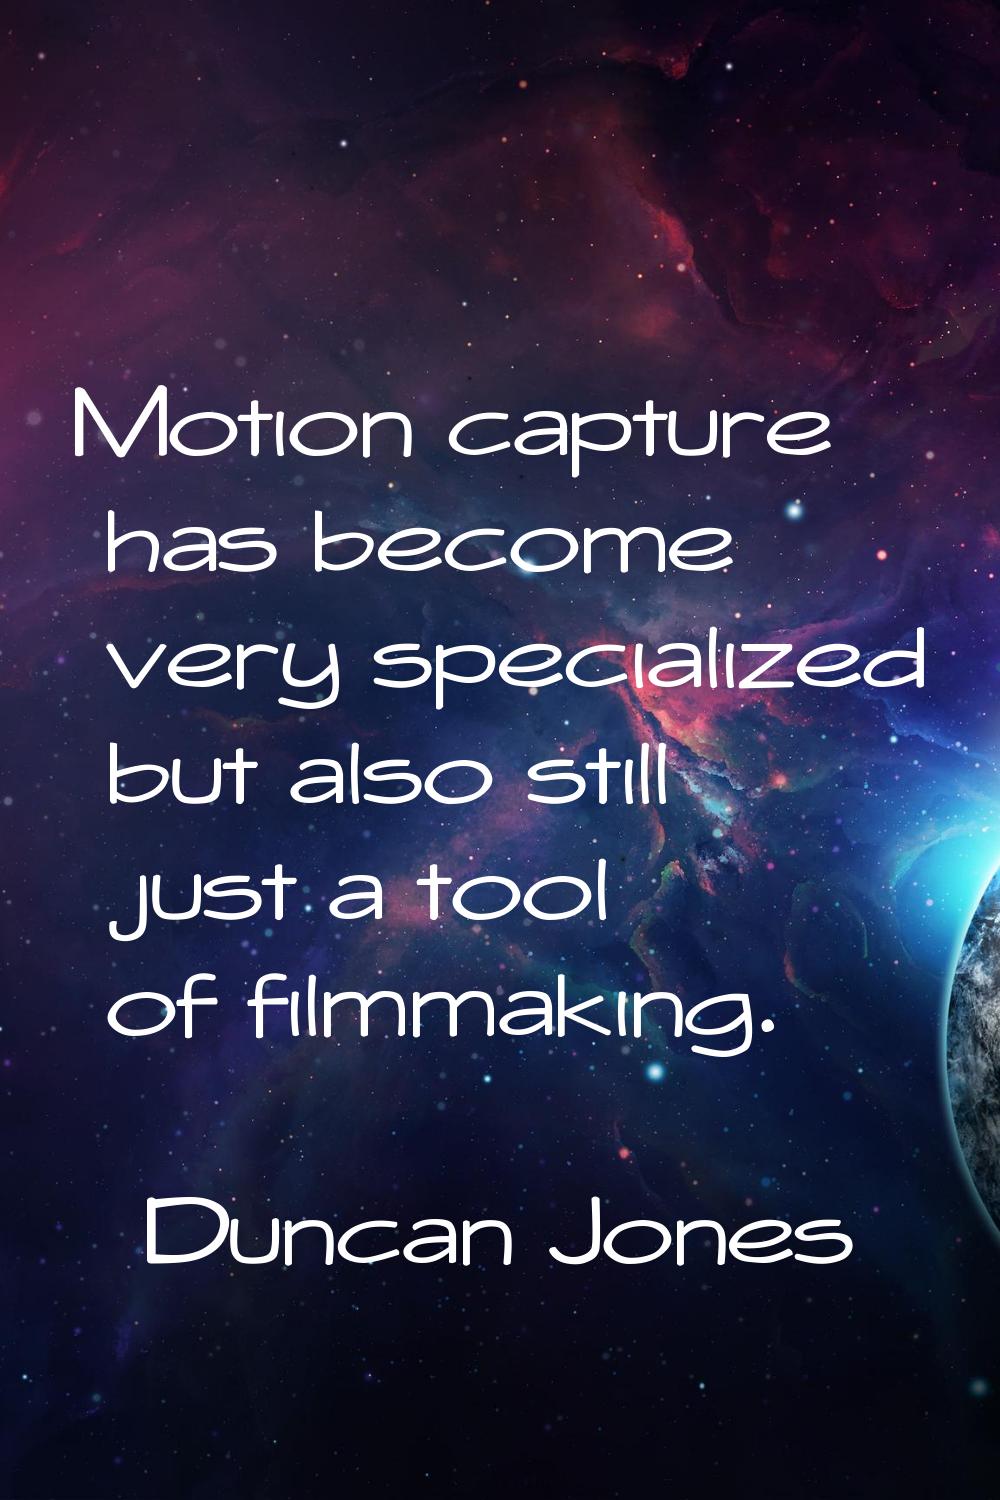 Motion capture has become very specialized but also still just a tool of filmmaking.